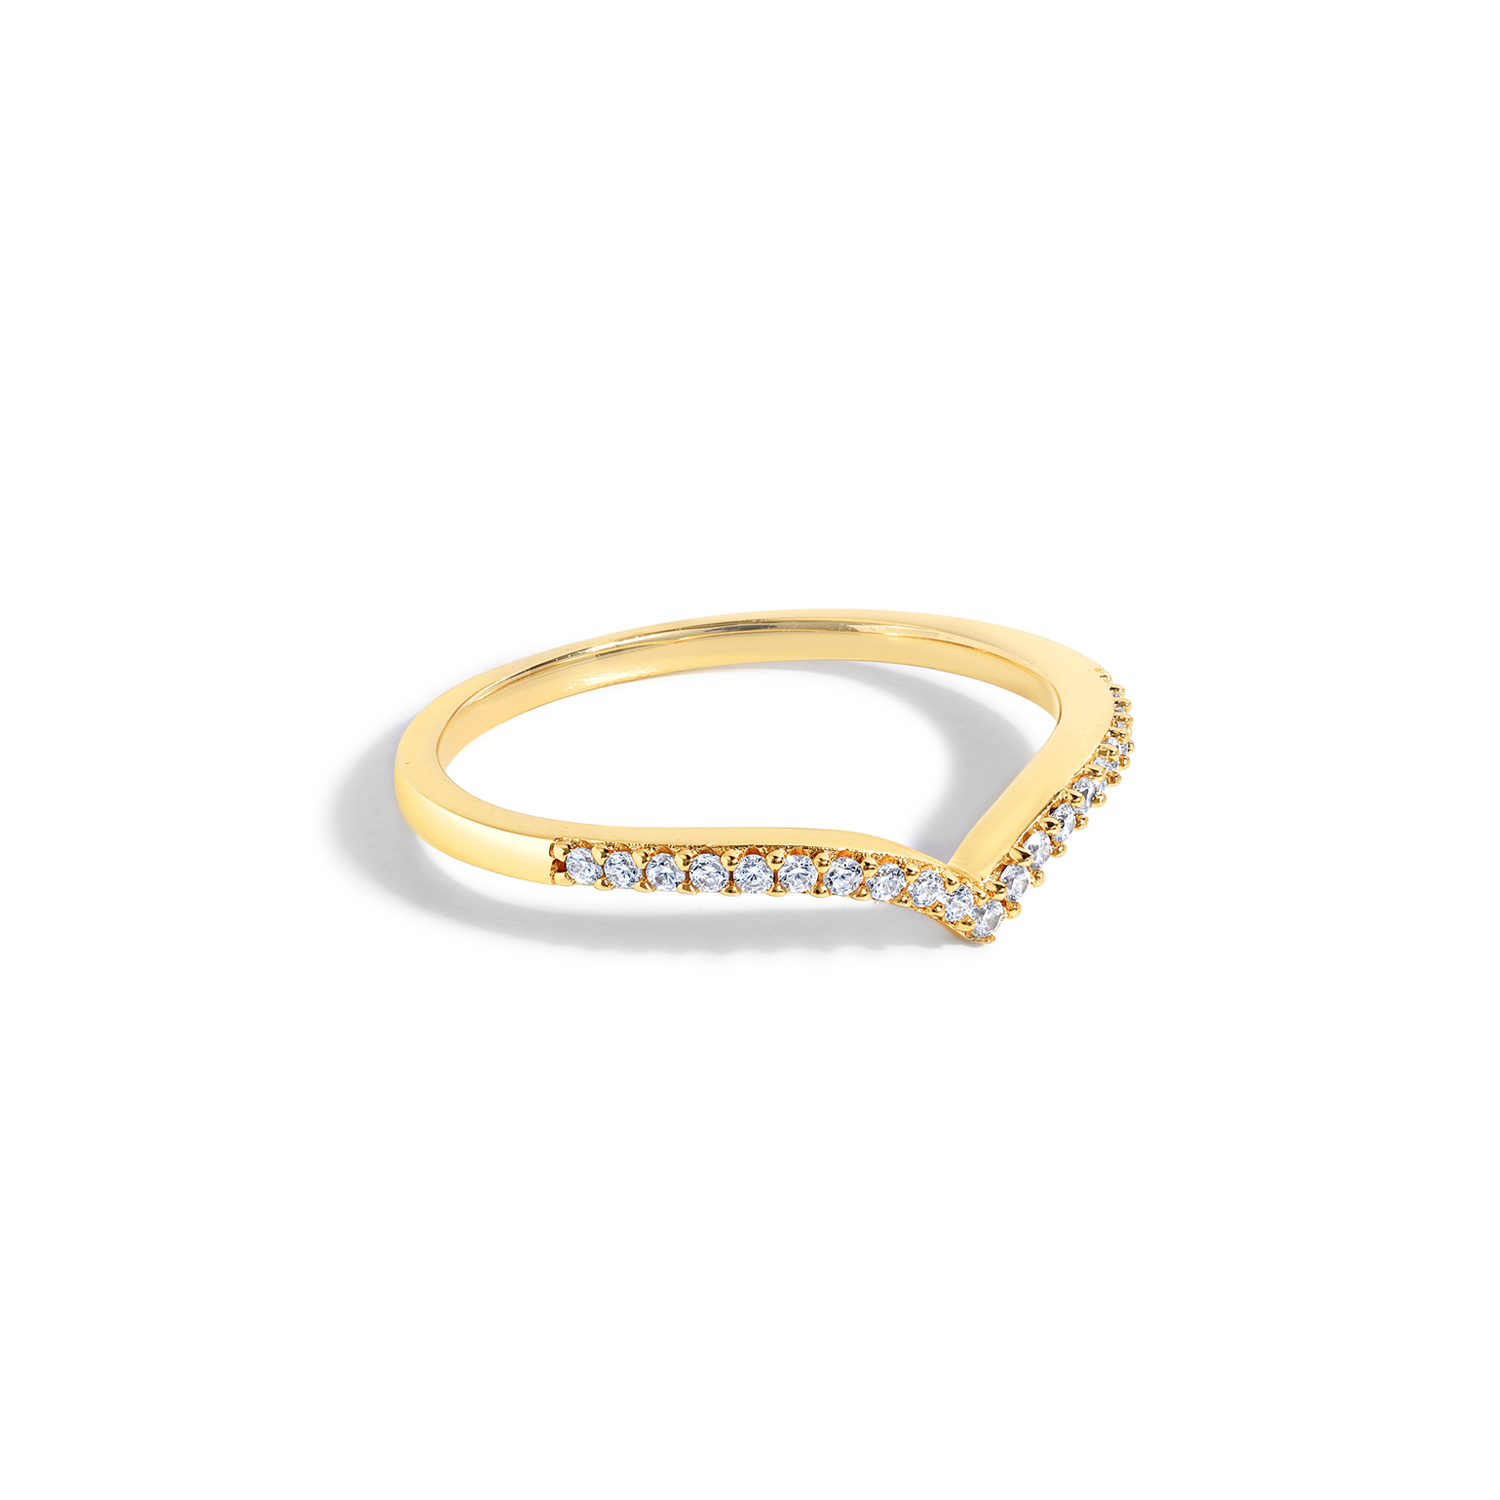 Elegant and classy double ring set with cubic zirconia in gold.